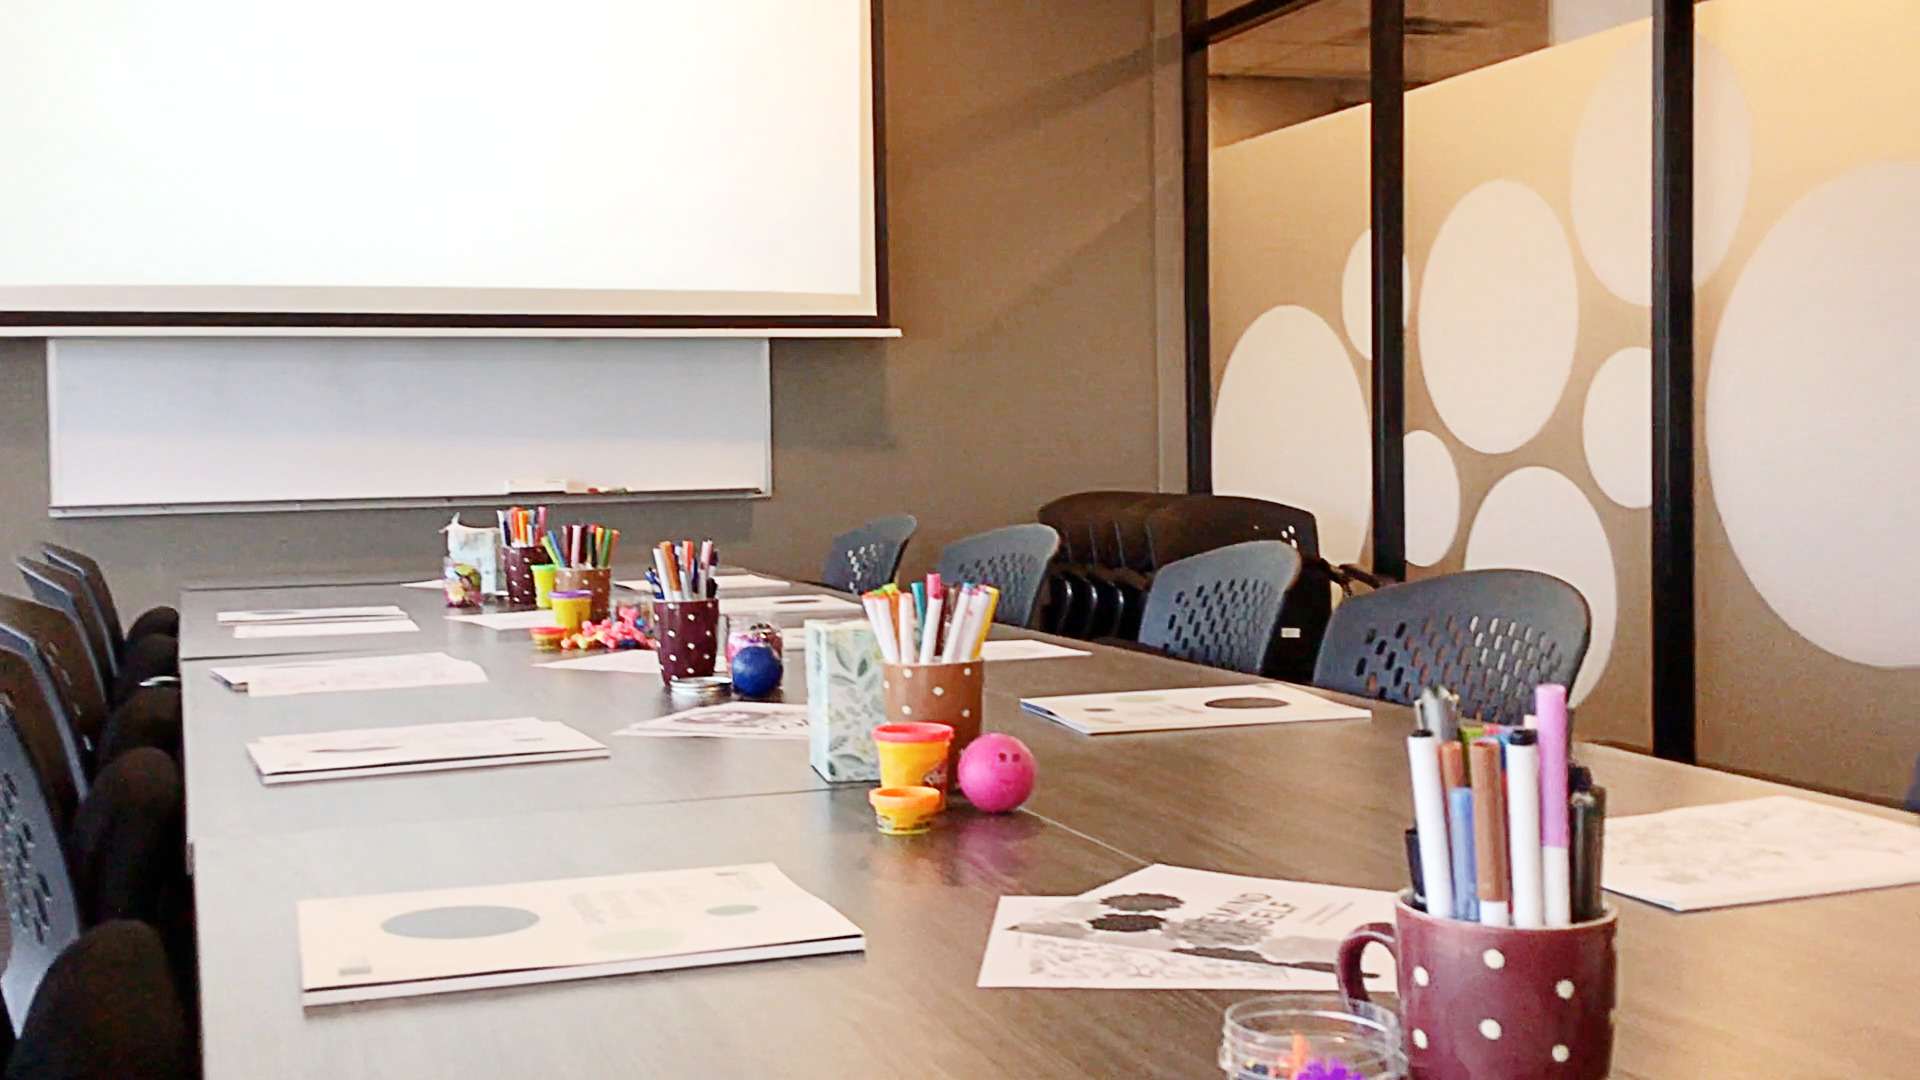 SACE services being offered in the boardroom, with workbooks and fidget toys arranged on the long table for participants